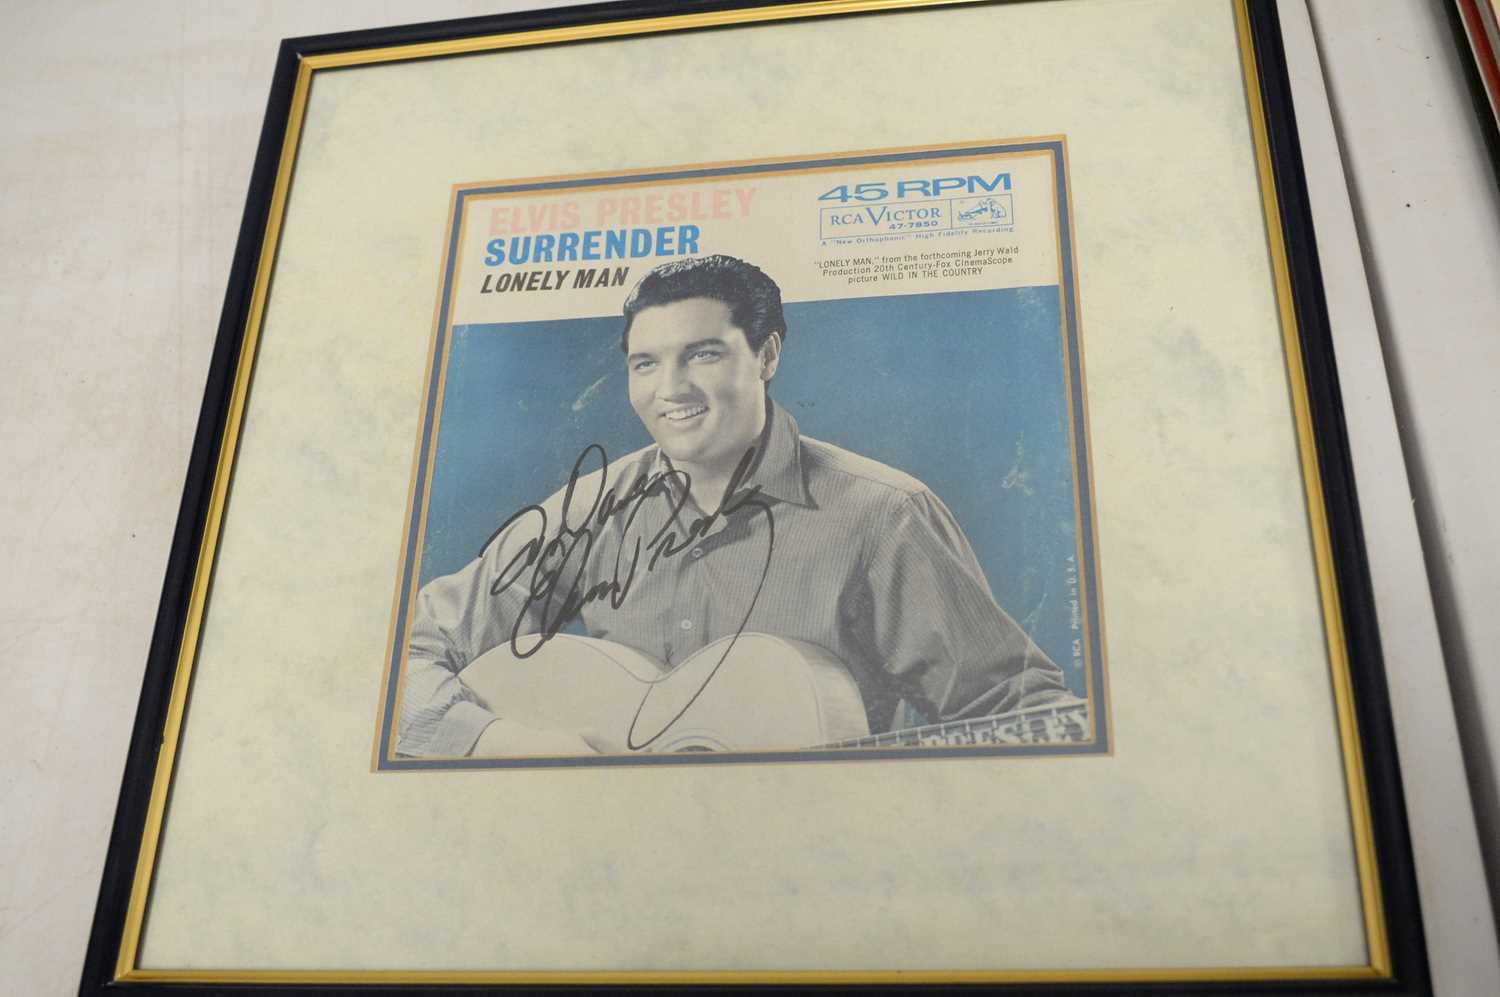 Lot 499 - An autographed Elvis Presley record sleeve.